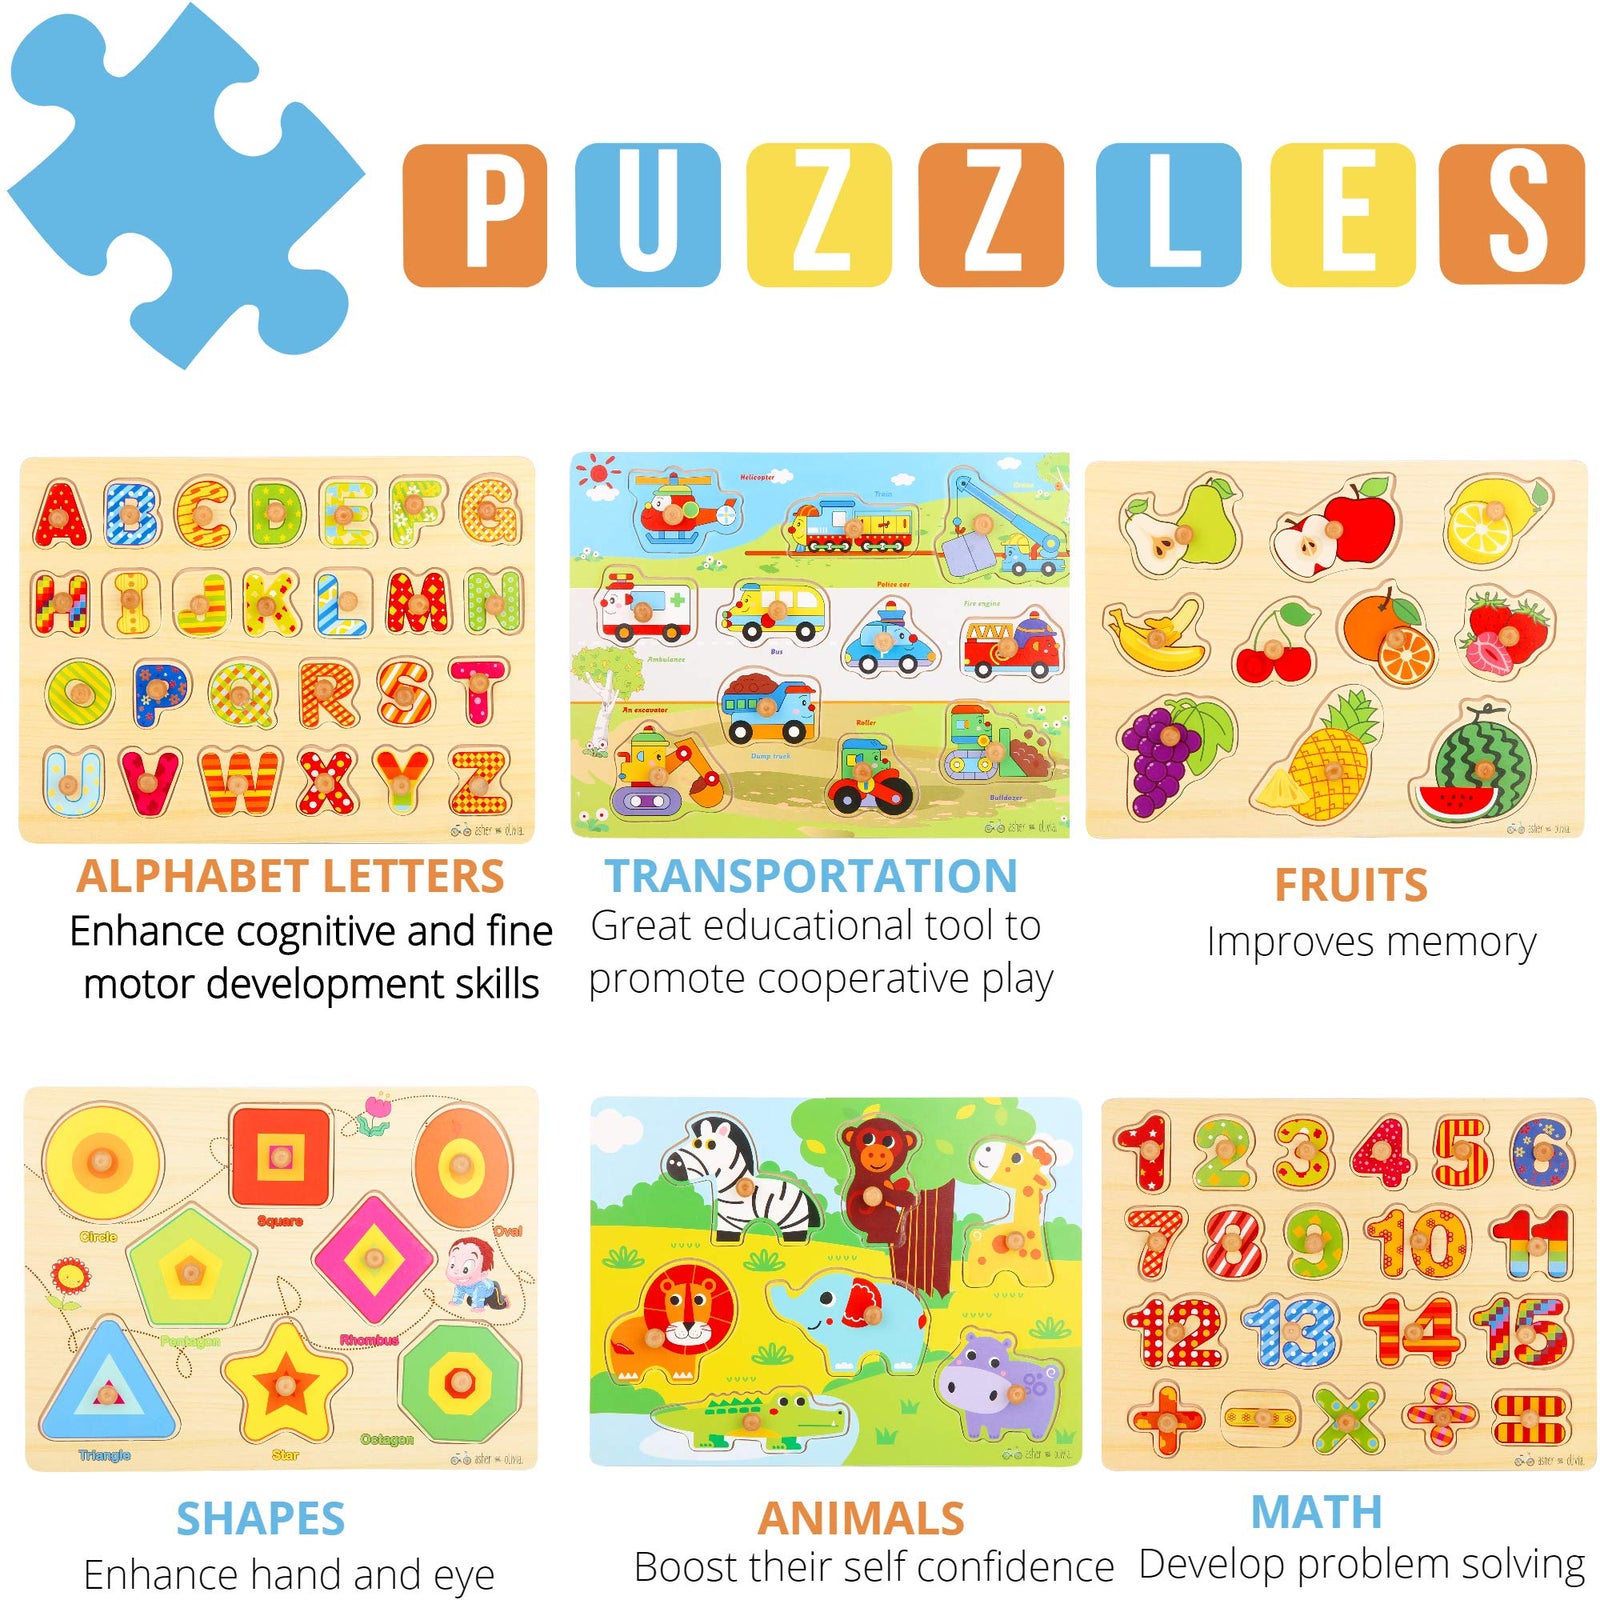 Wooden Toddler Puzzles and Rack Set - (6 Pack) Bundle with Storage Holder Rack and Learning Clock - Kids Educational Preschool Peg Puzzles for Children Babies Boys Girls - Alphabet Numbers Zoo Cars